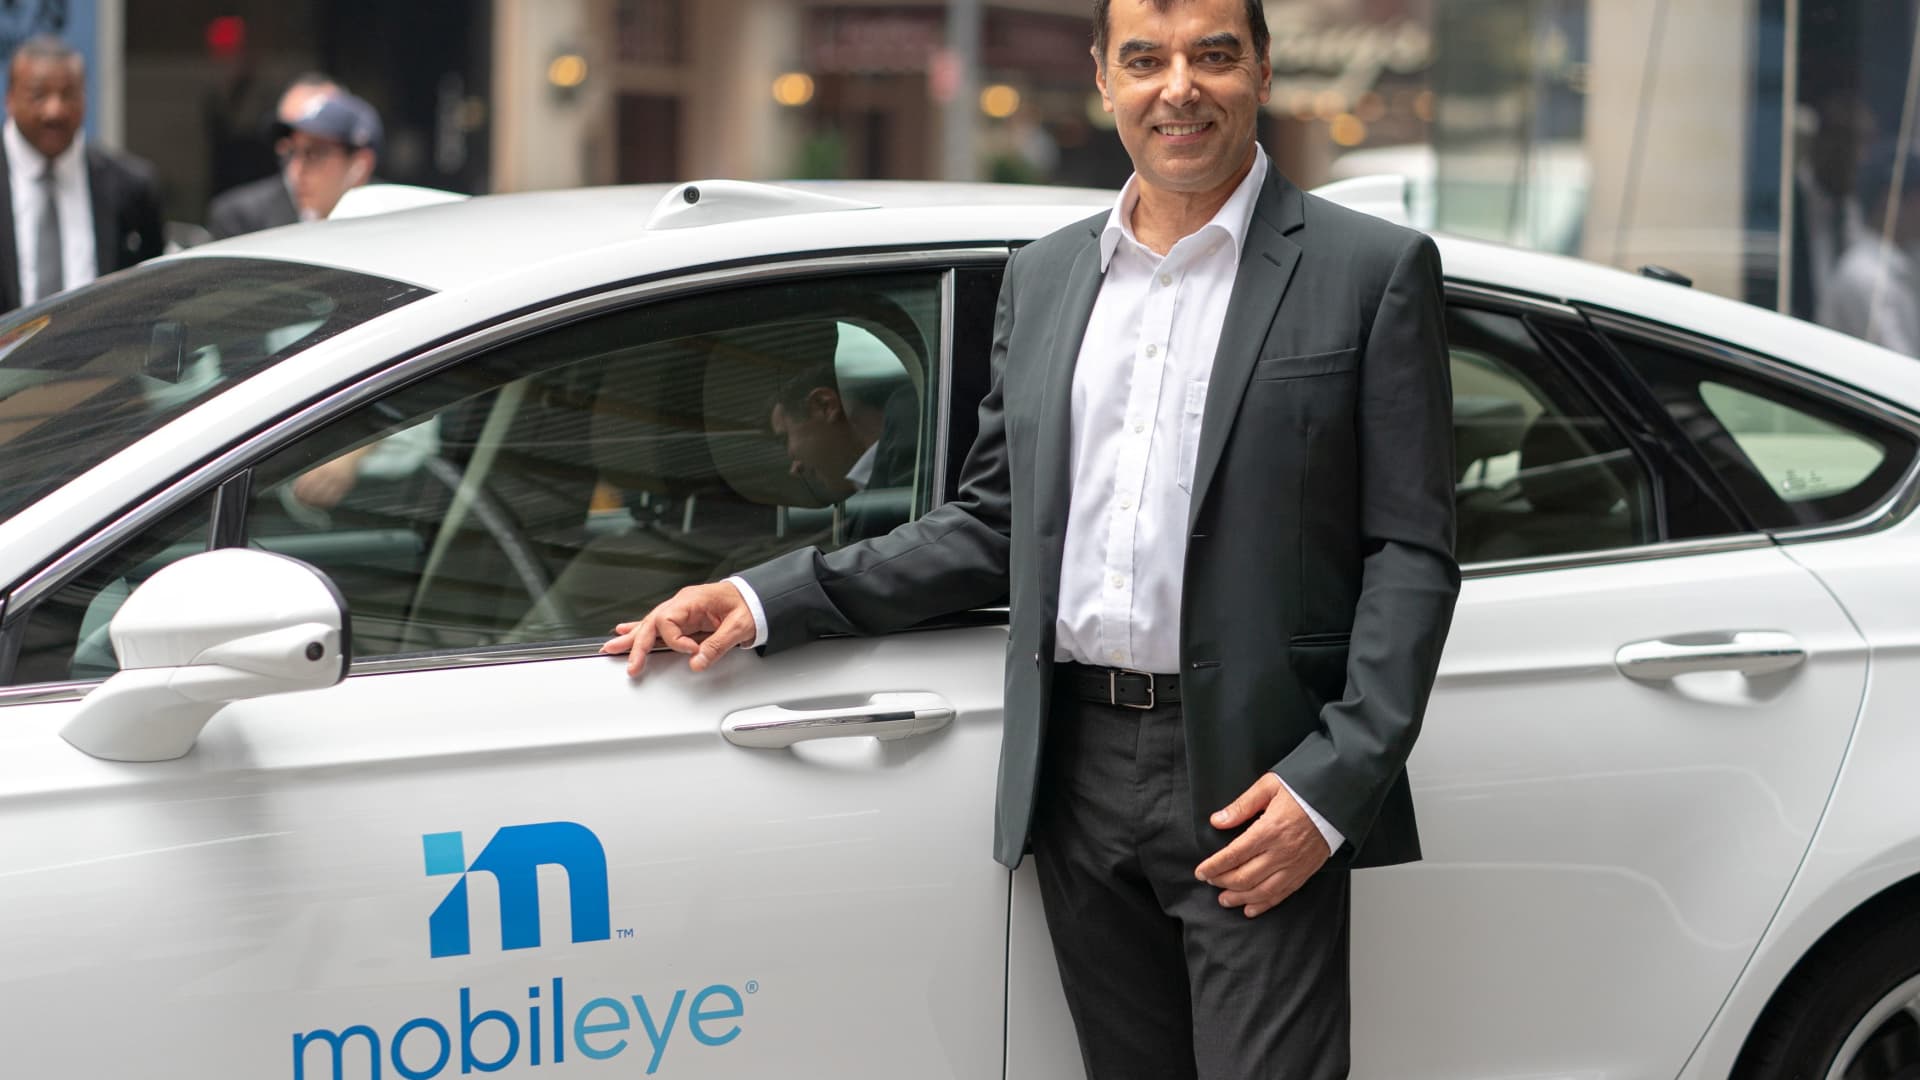 Mobileye's CEO Amnon Shashua poses with a Mobileye driverless vehicle at the Nasdaq Market site in New York, July 20, 2021.